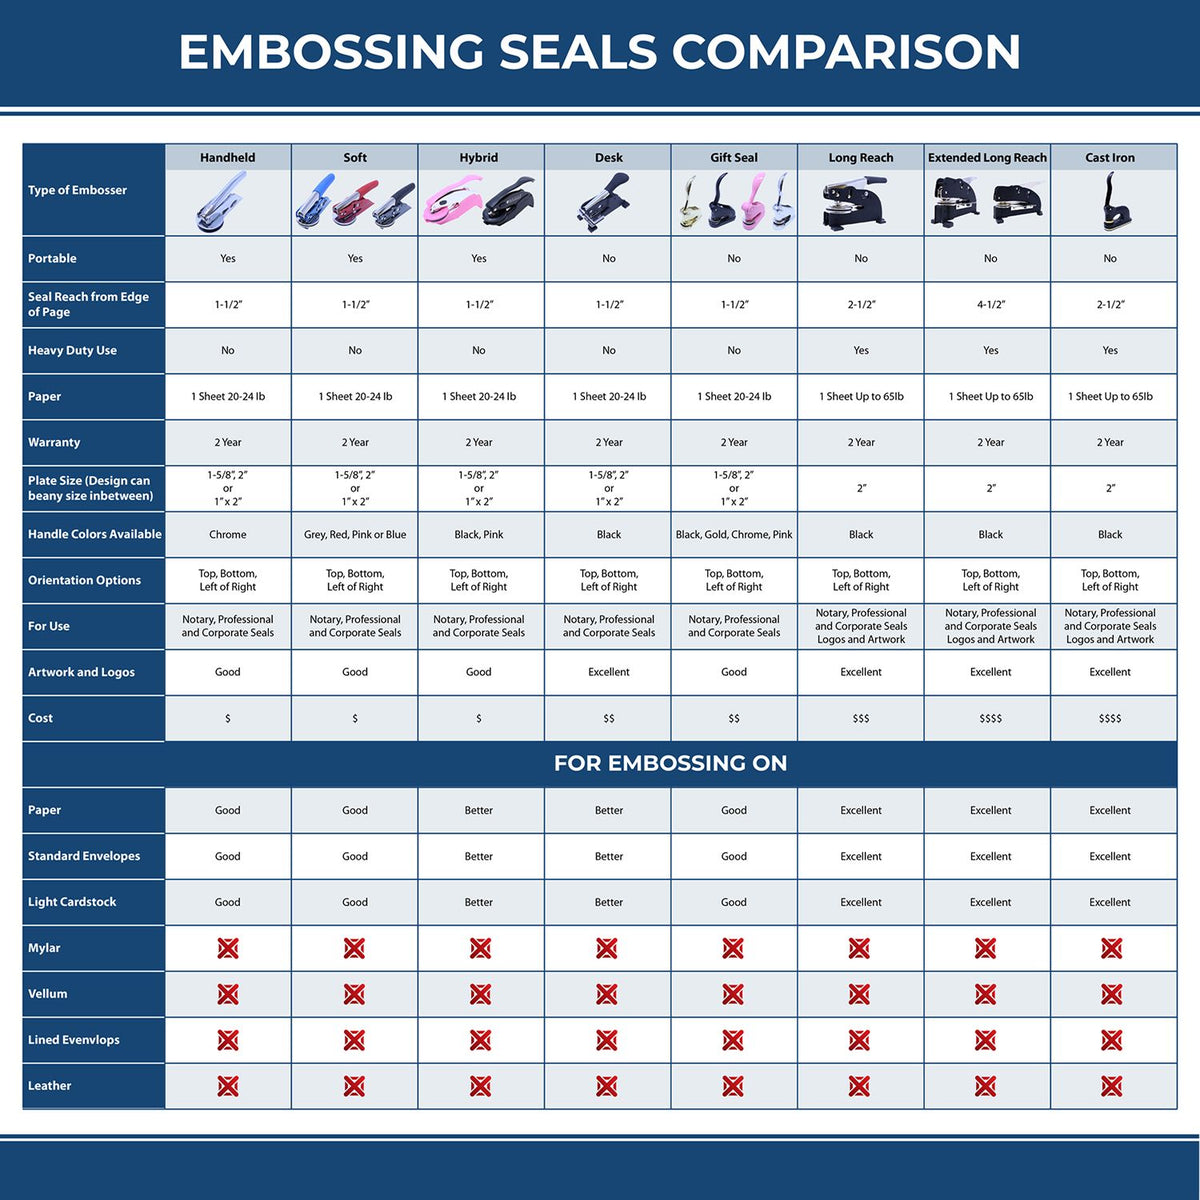 A comparison chart for the different types of mount models available for the State of Idaho Long Reach Architectural Embossing Seal.